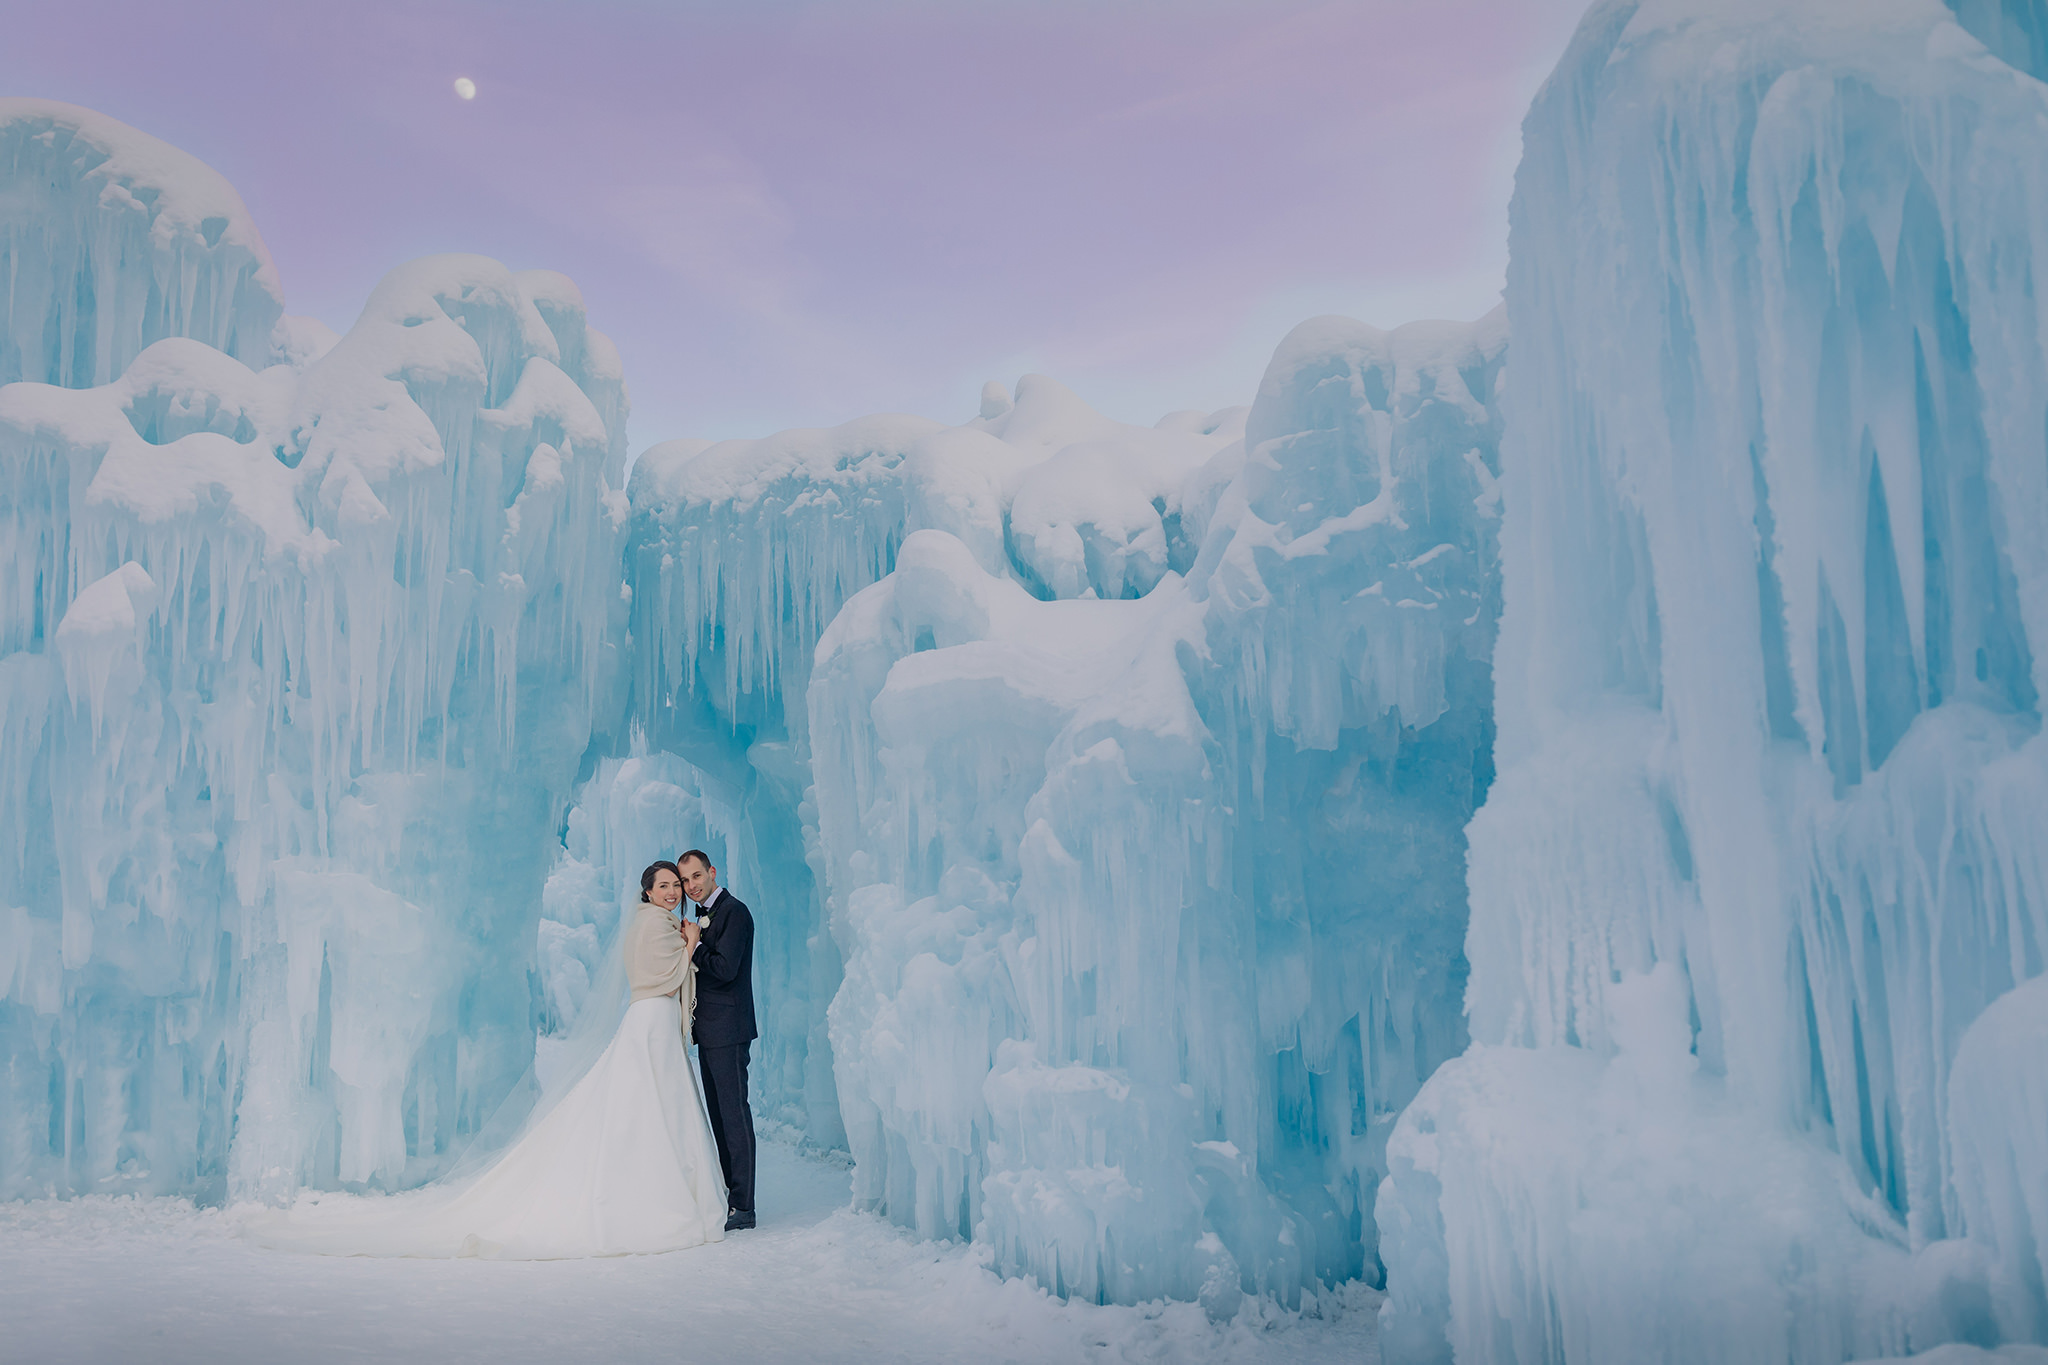 Edmonton Winter Wedding IceCastles portraits in man-made Ice Castle straight out of Frozen photographed by ENV Photography